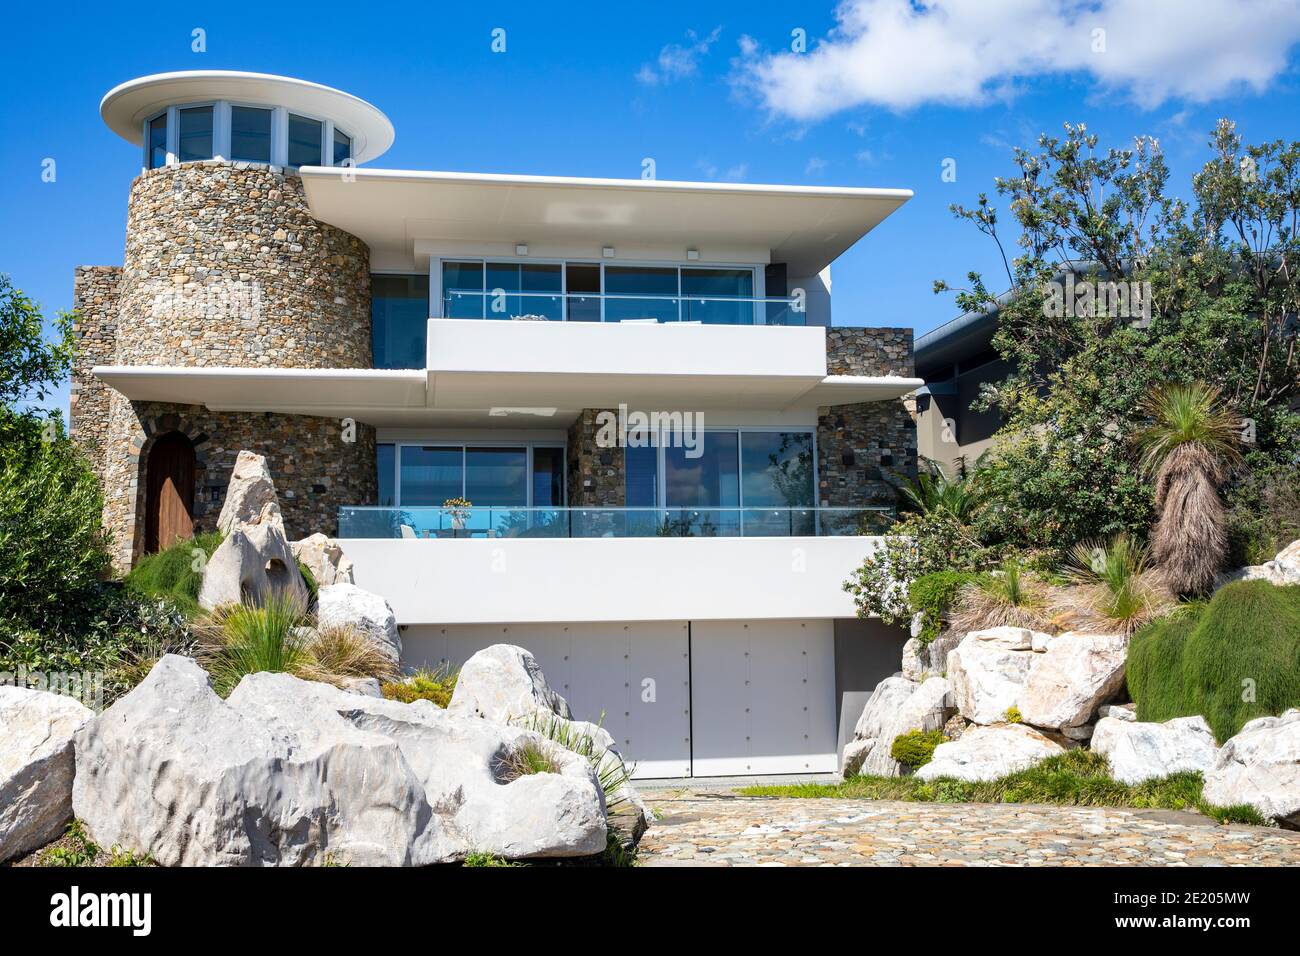 Sydney large detached coastal house in Avalon Beach with rock and green front domestic garden,Sydney,Australia Stock Photo